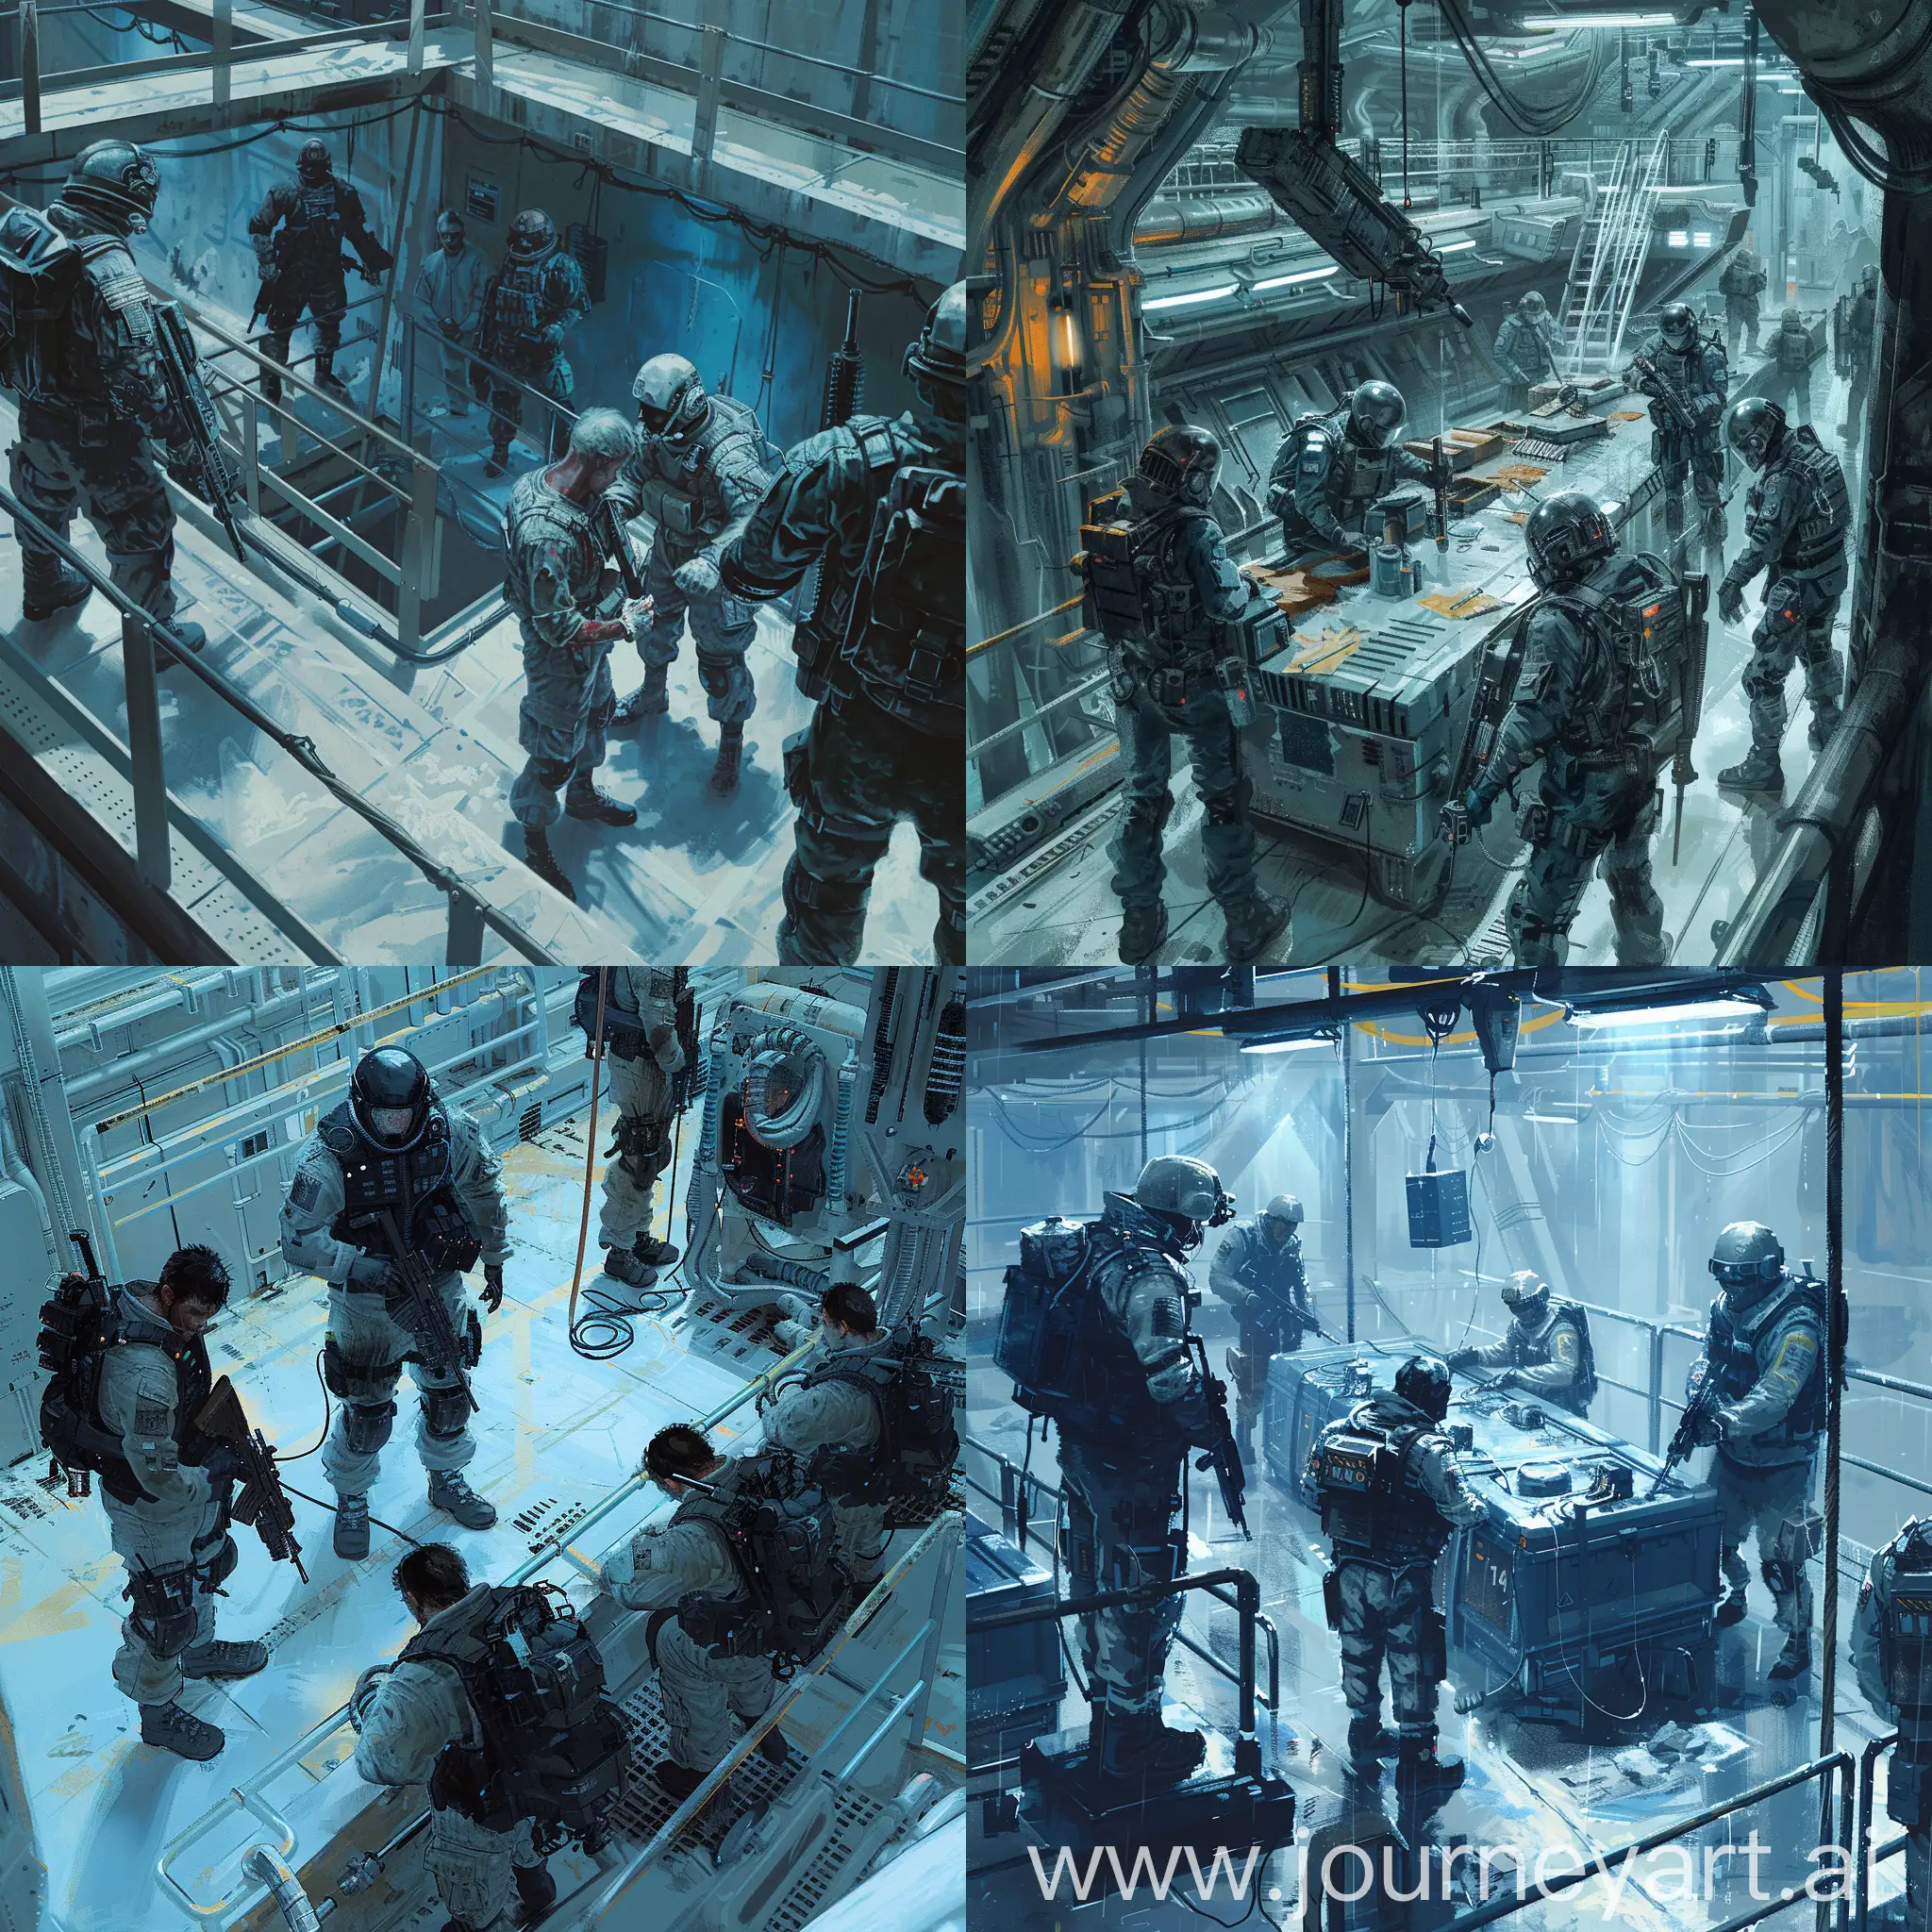 Dystopian-Space-Base-Interior-Nervous-Workers-and-Cold-Soldiers-in-Punk-Style-Oil-Painting